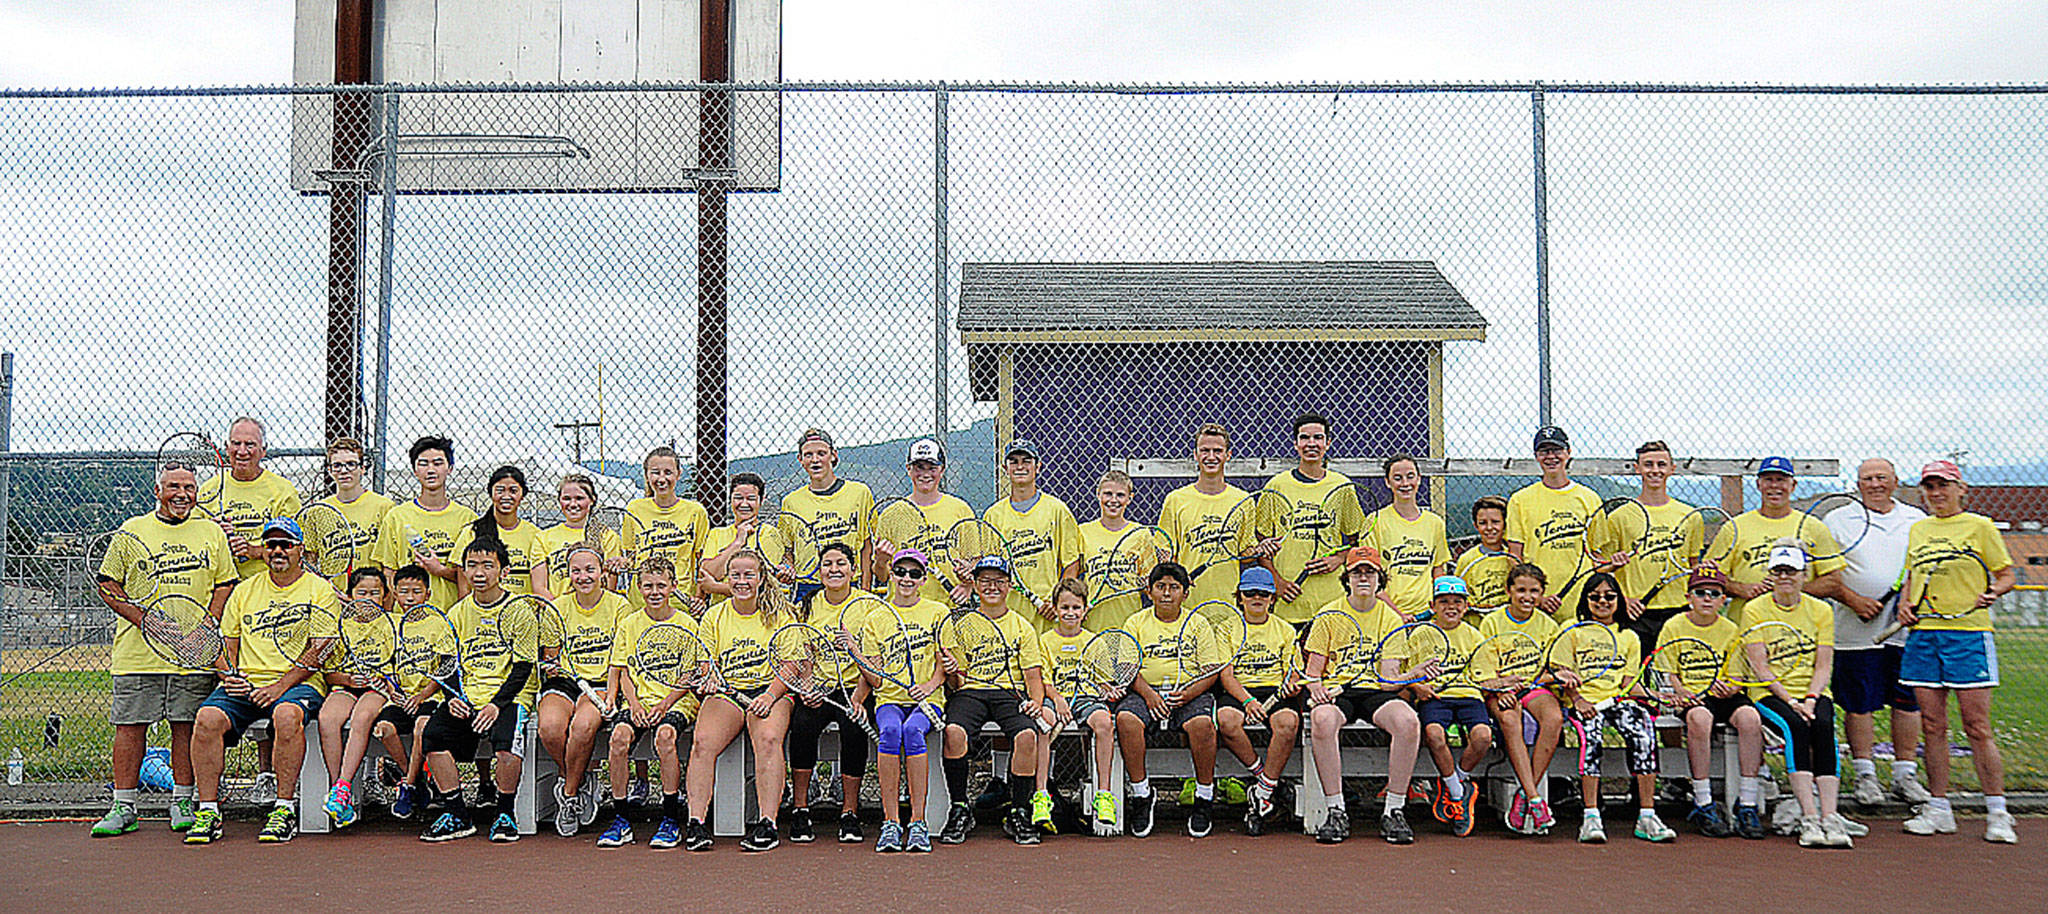 Participants and volunteers/coaches at the Sequim Tennis Academy take a break from activities at the Sequim High School courts last week. Sequim Gazette photo by Michael Dashiell